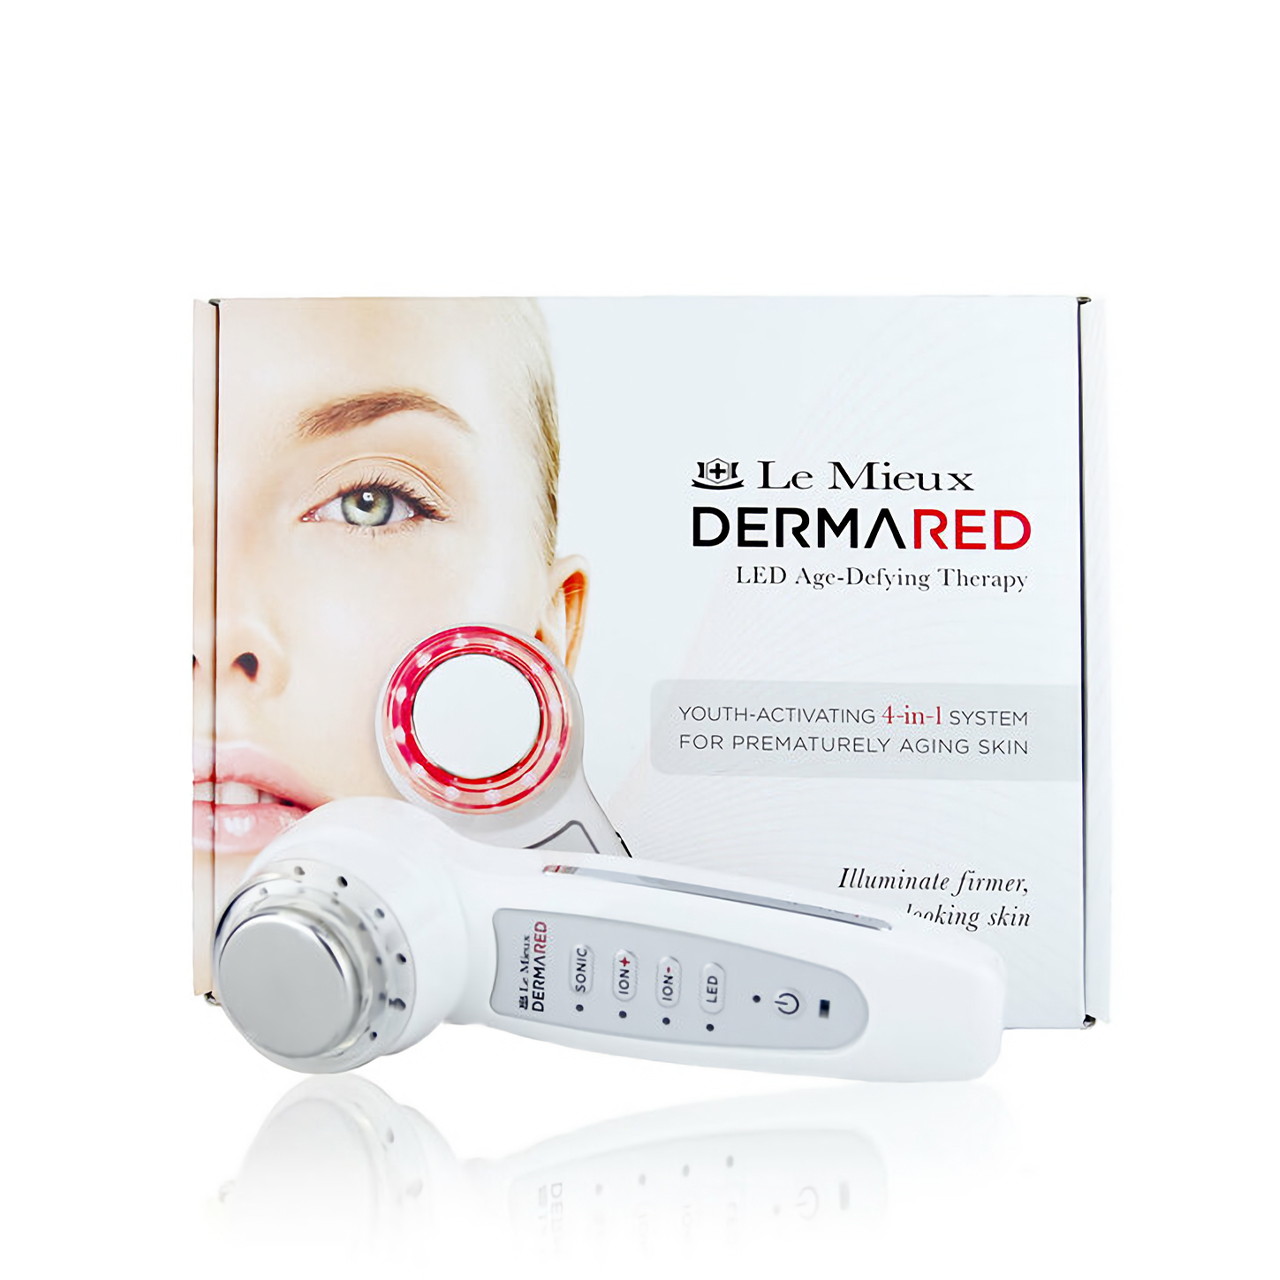 What comes in the dermared led age defying therapy